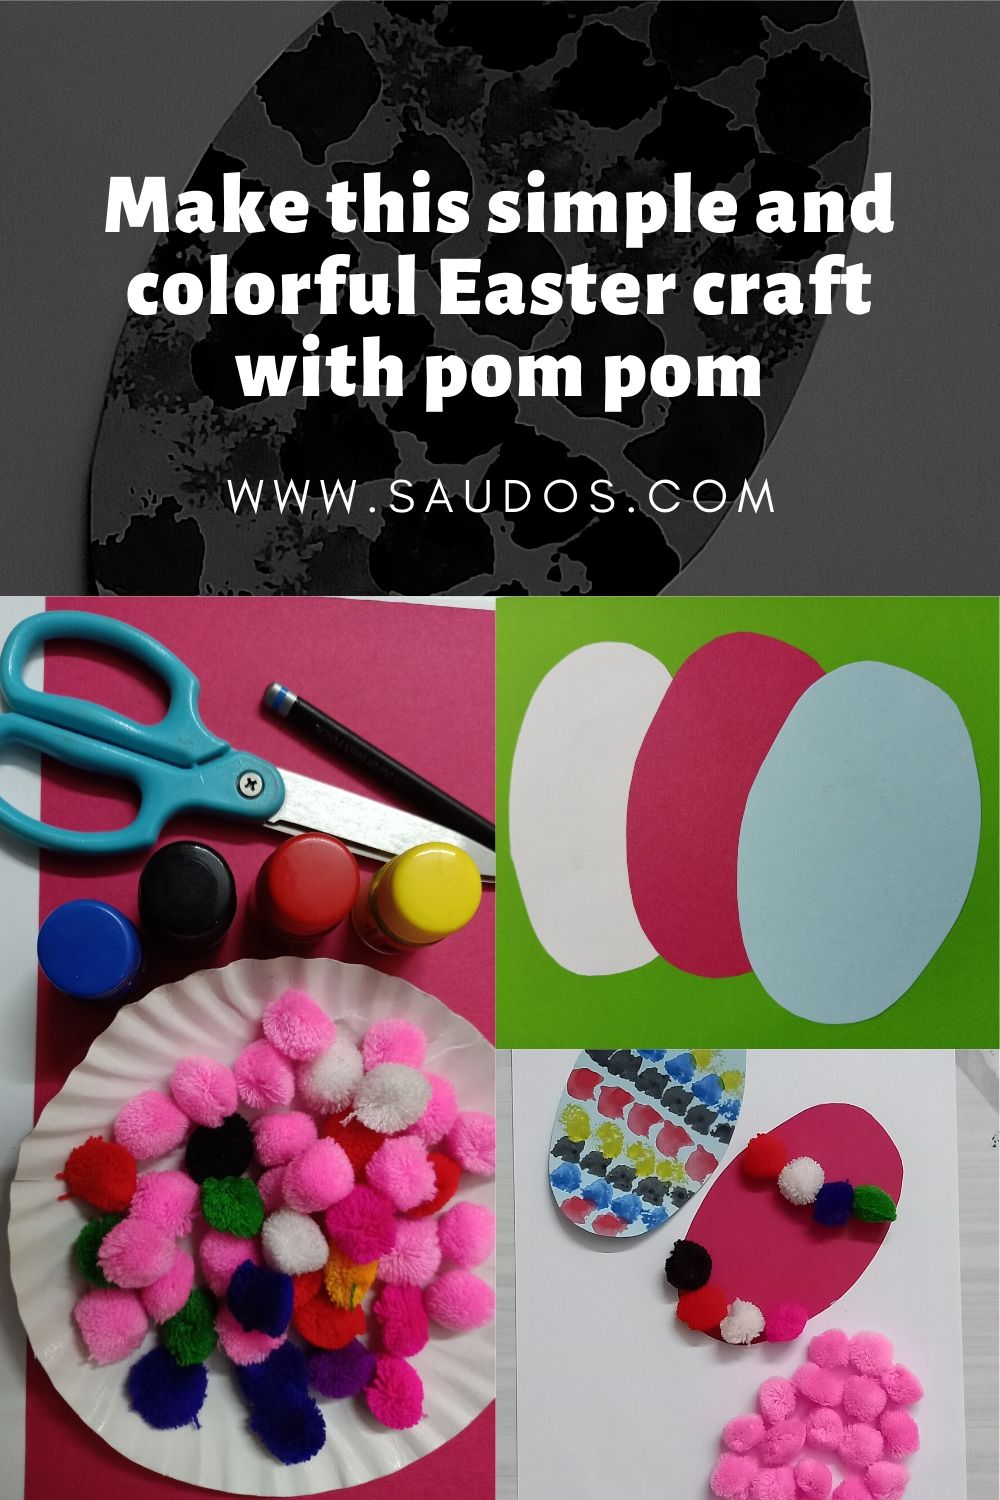 Make this simple and colorful Easter craft with pom pom